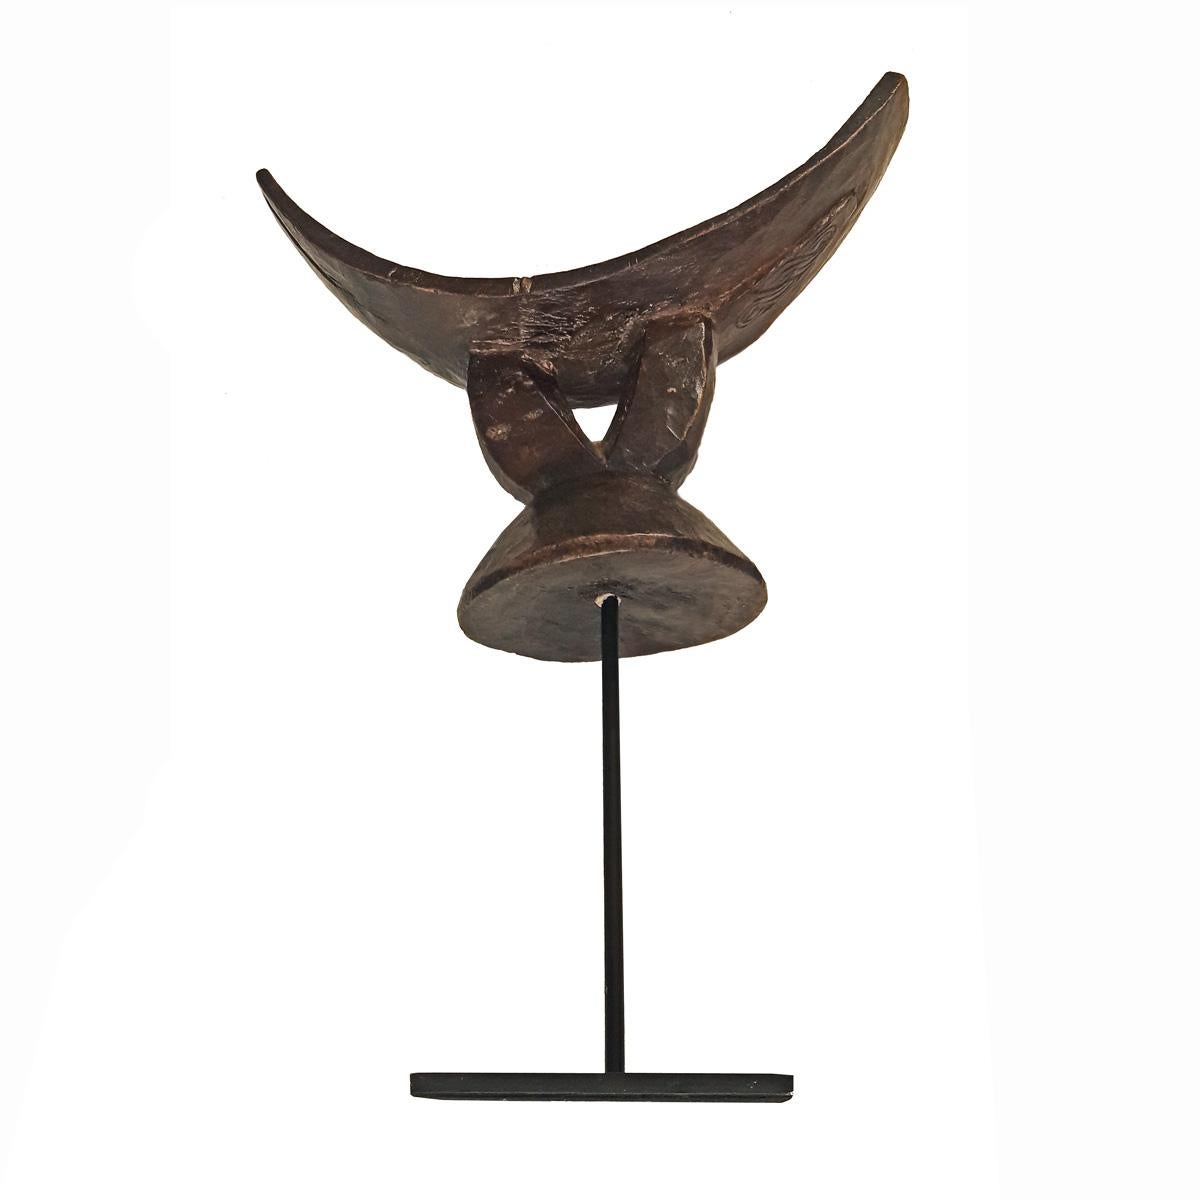 A headrest or stool, hand carved out of a single piece of teak wood. From Ethiopia, late 20th century. Mounted on a 4